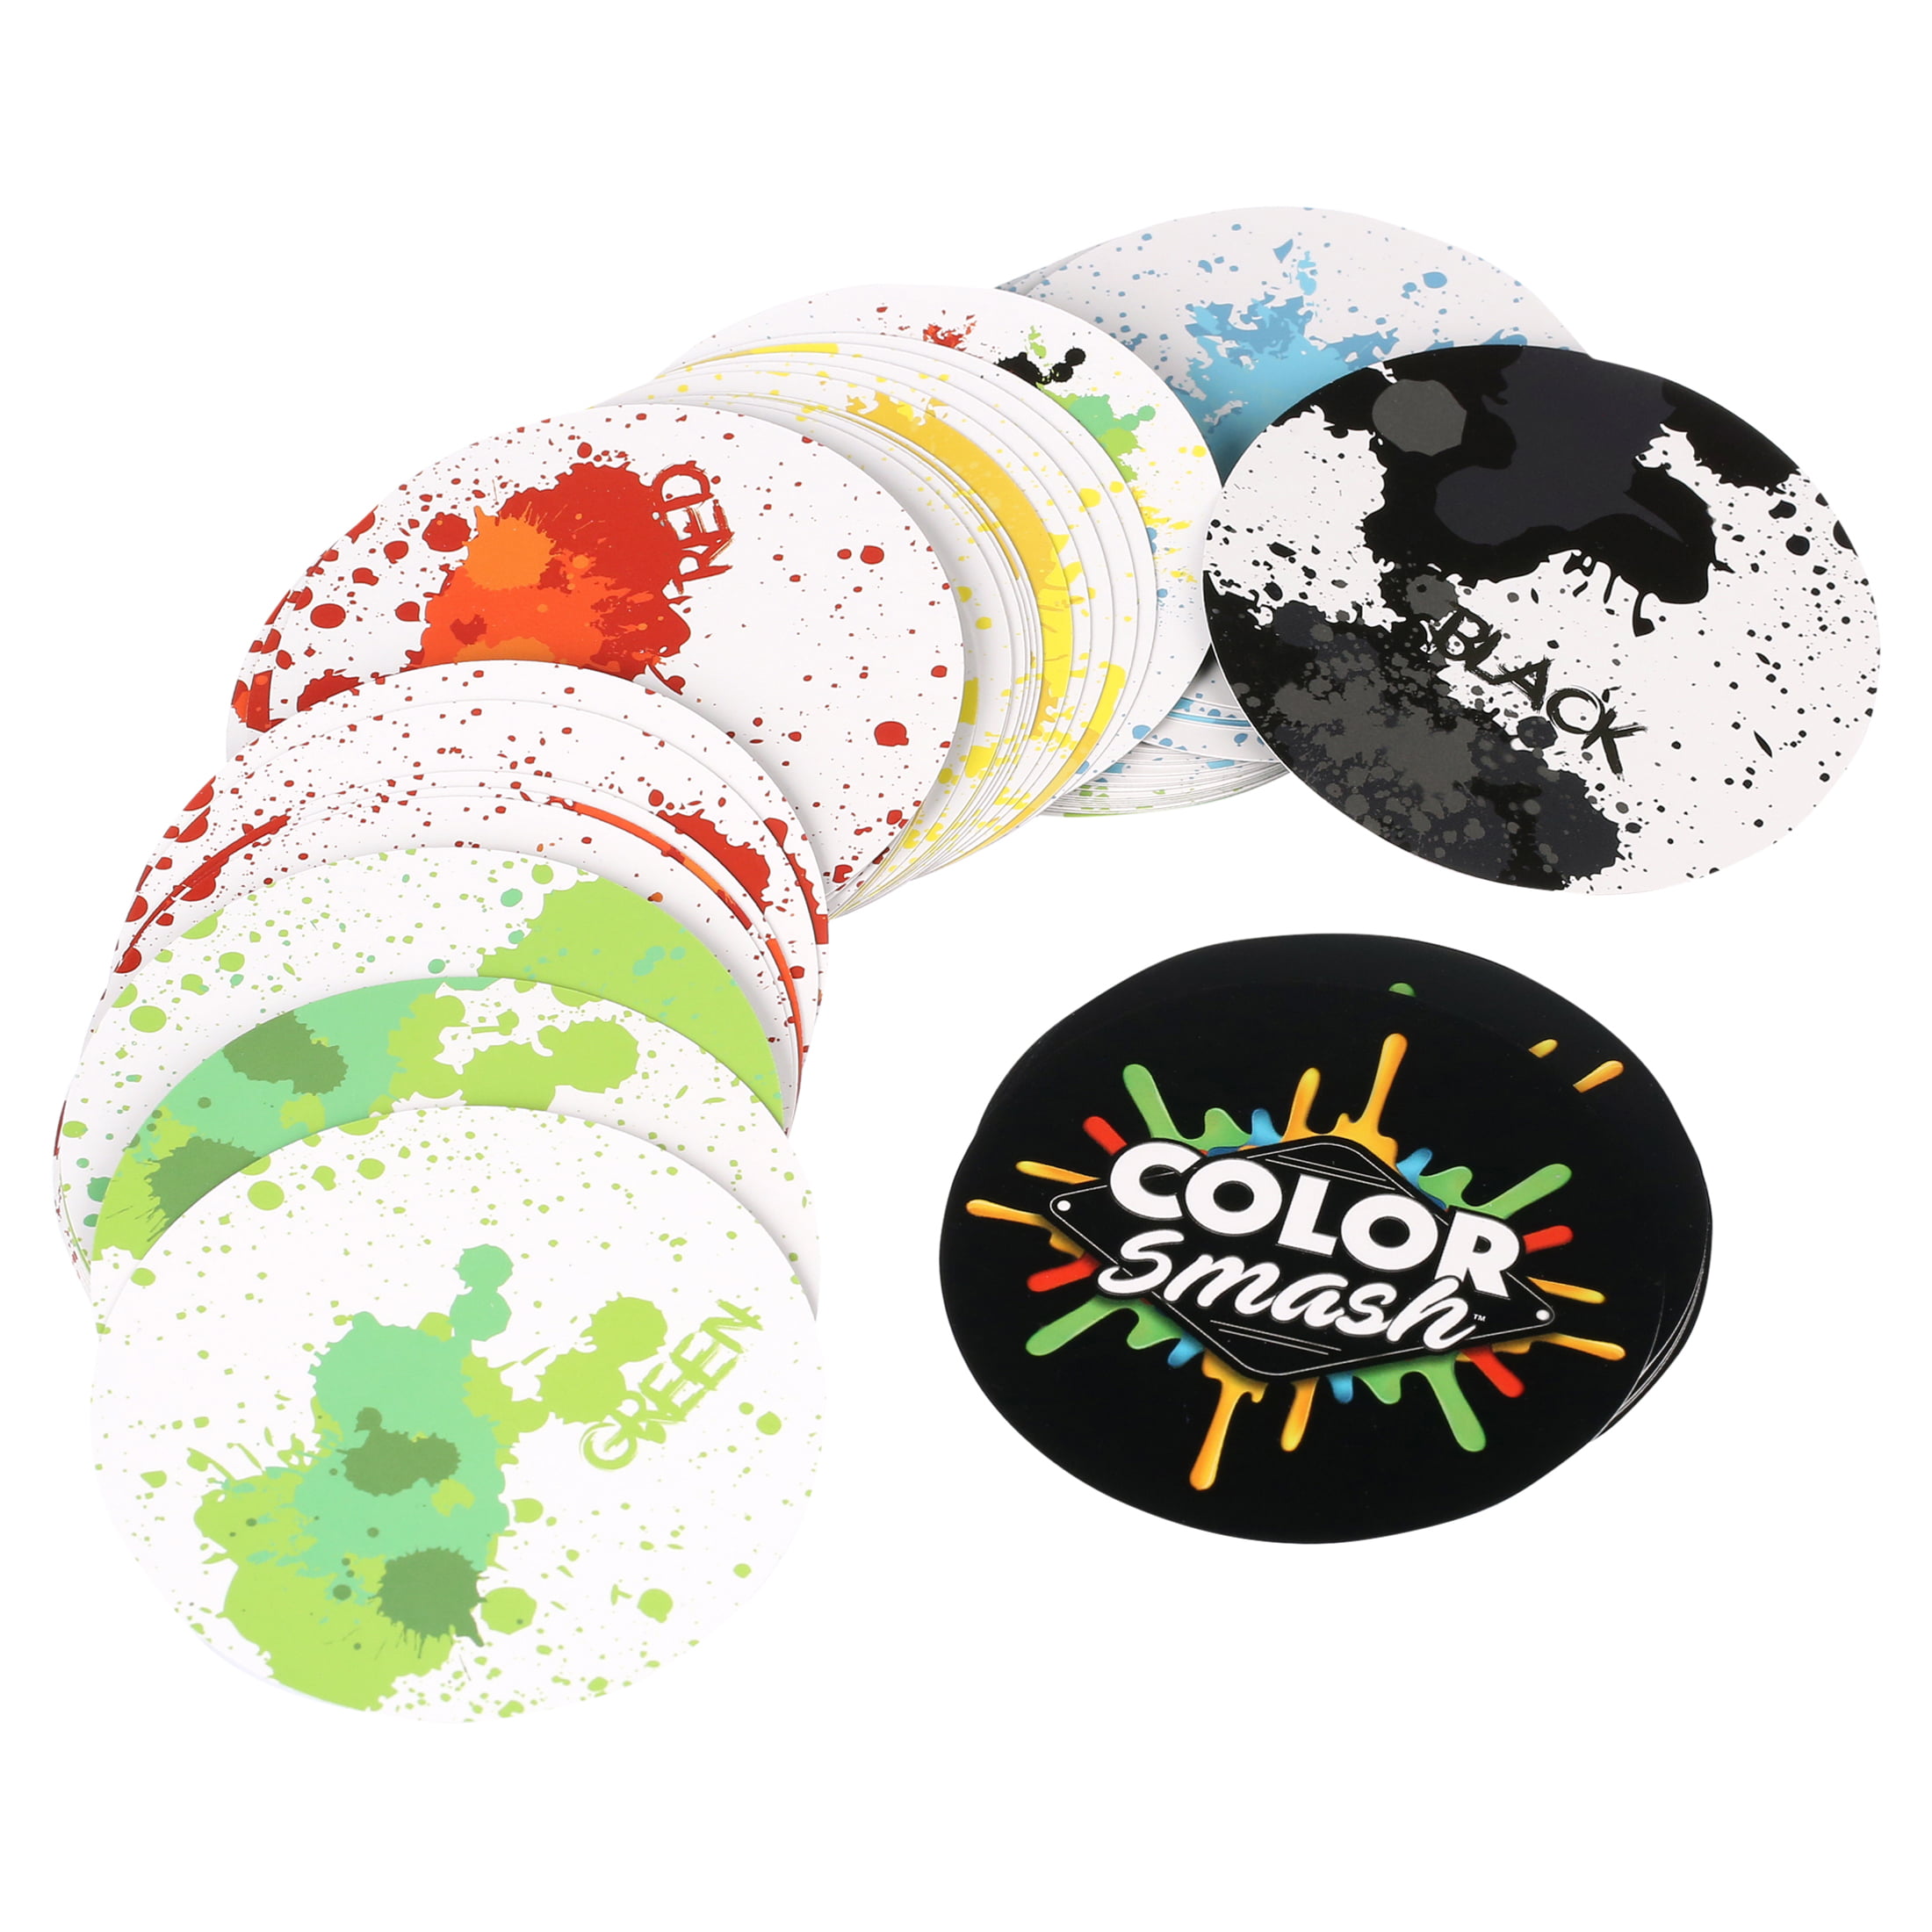 Color Smash is the fast moving game of colour coordination